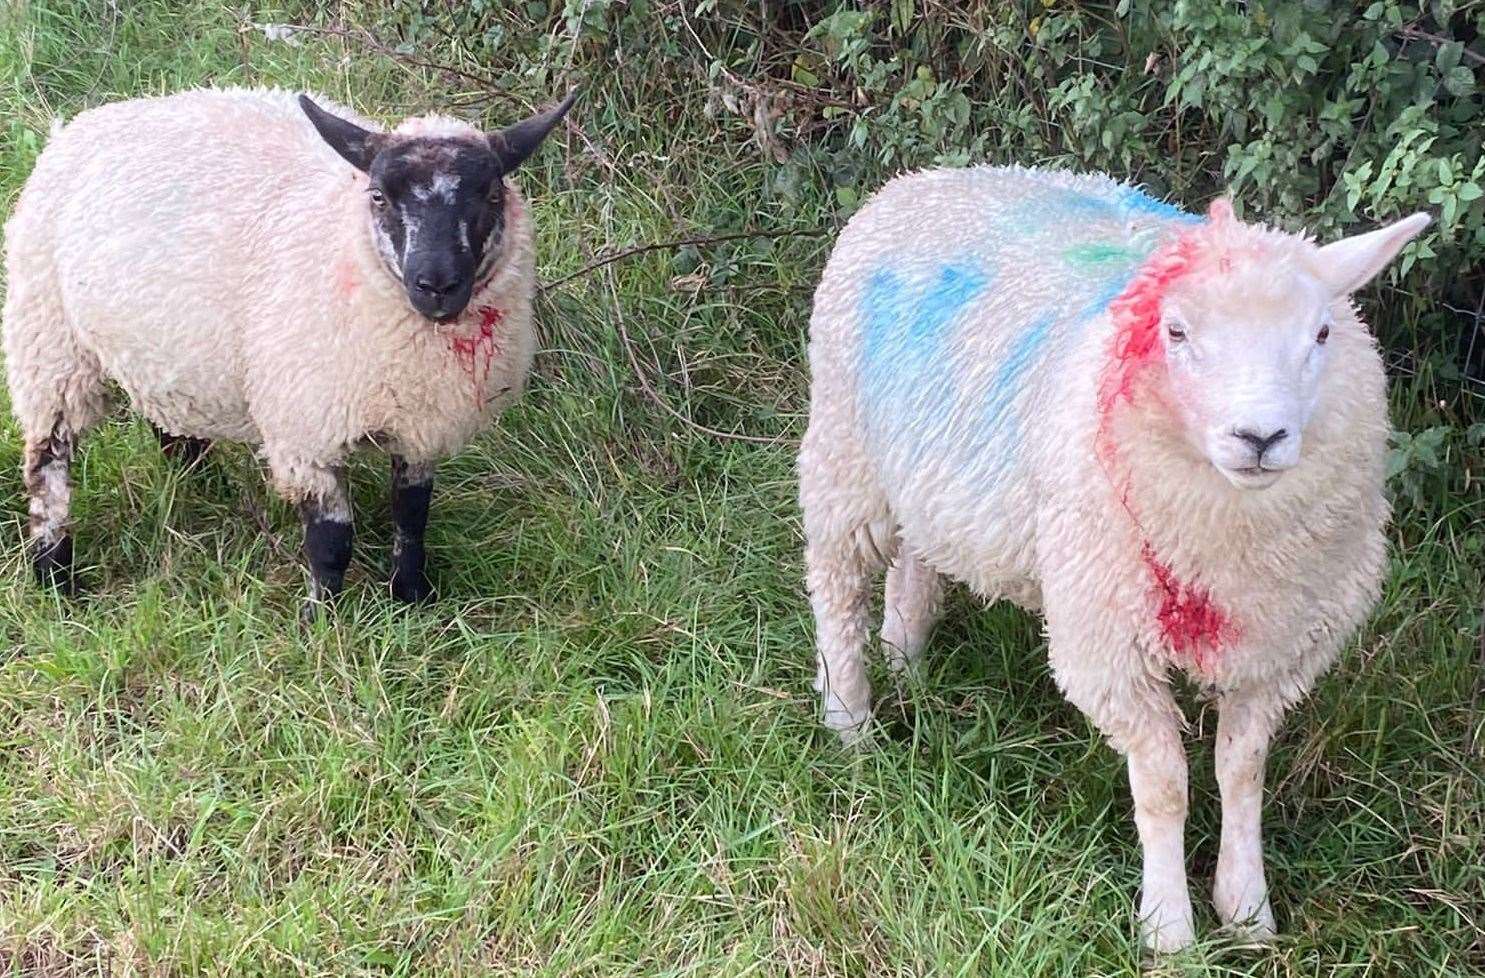 Three sheep were killed at the farm on Station Road, Halstead